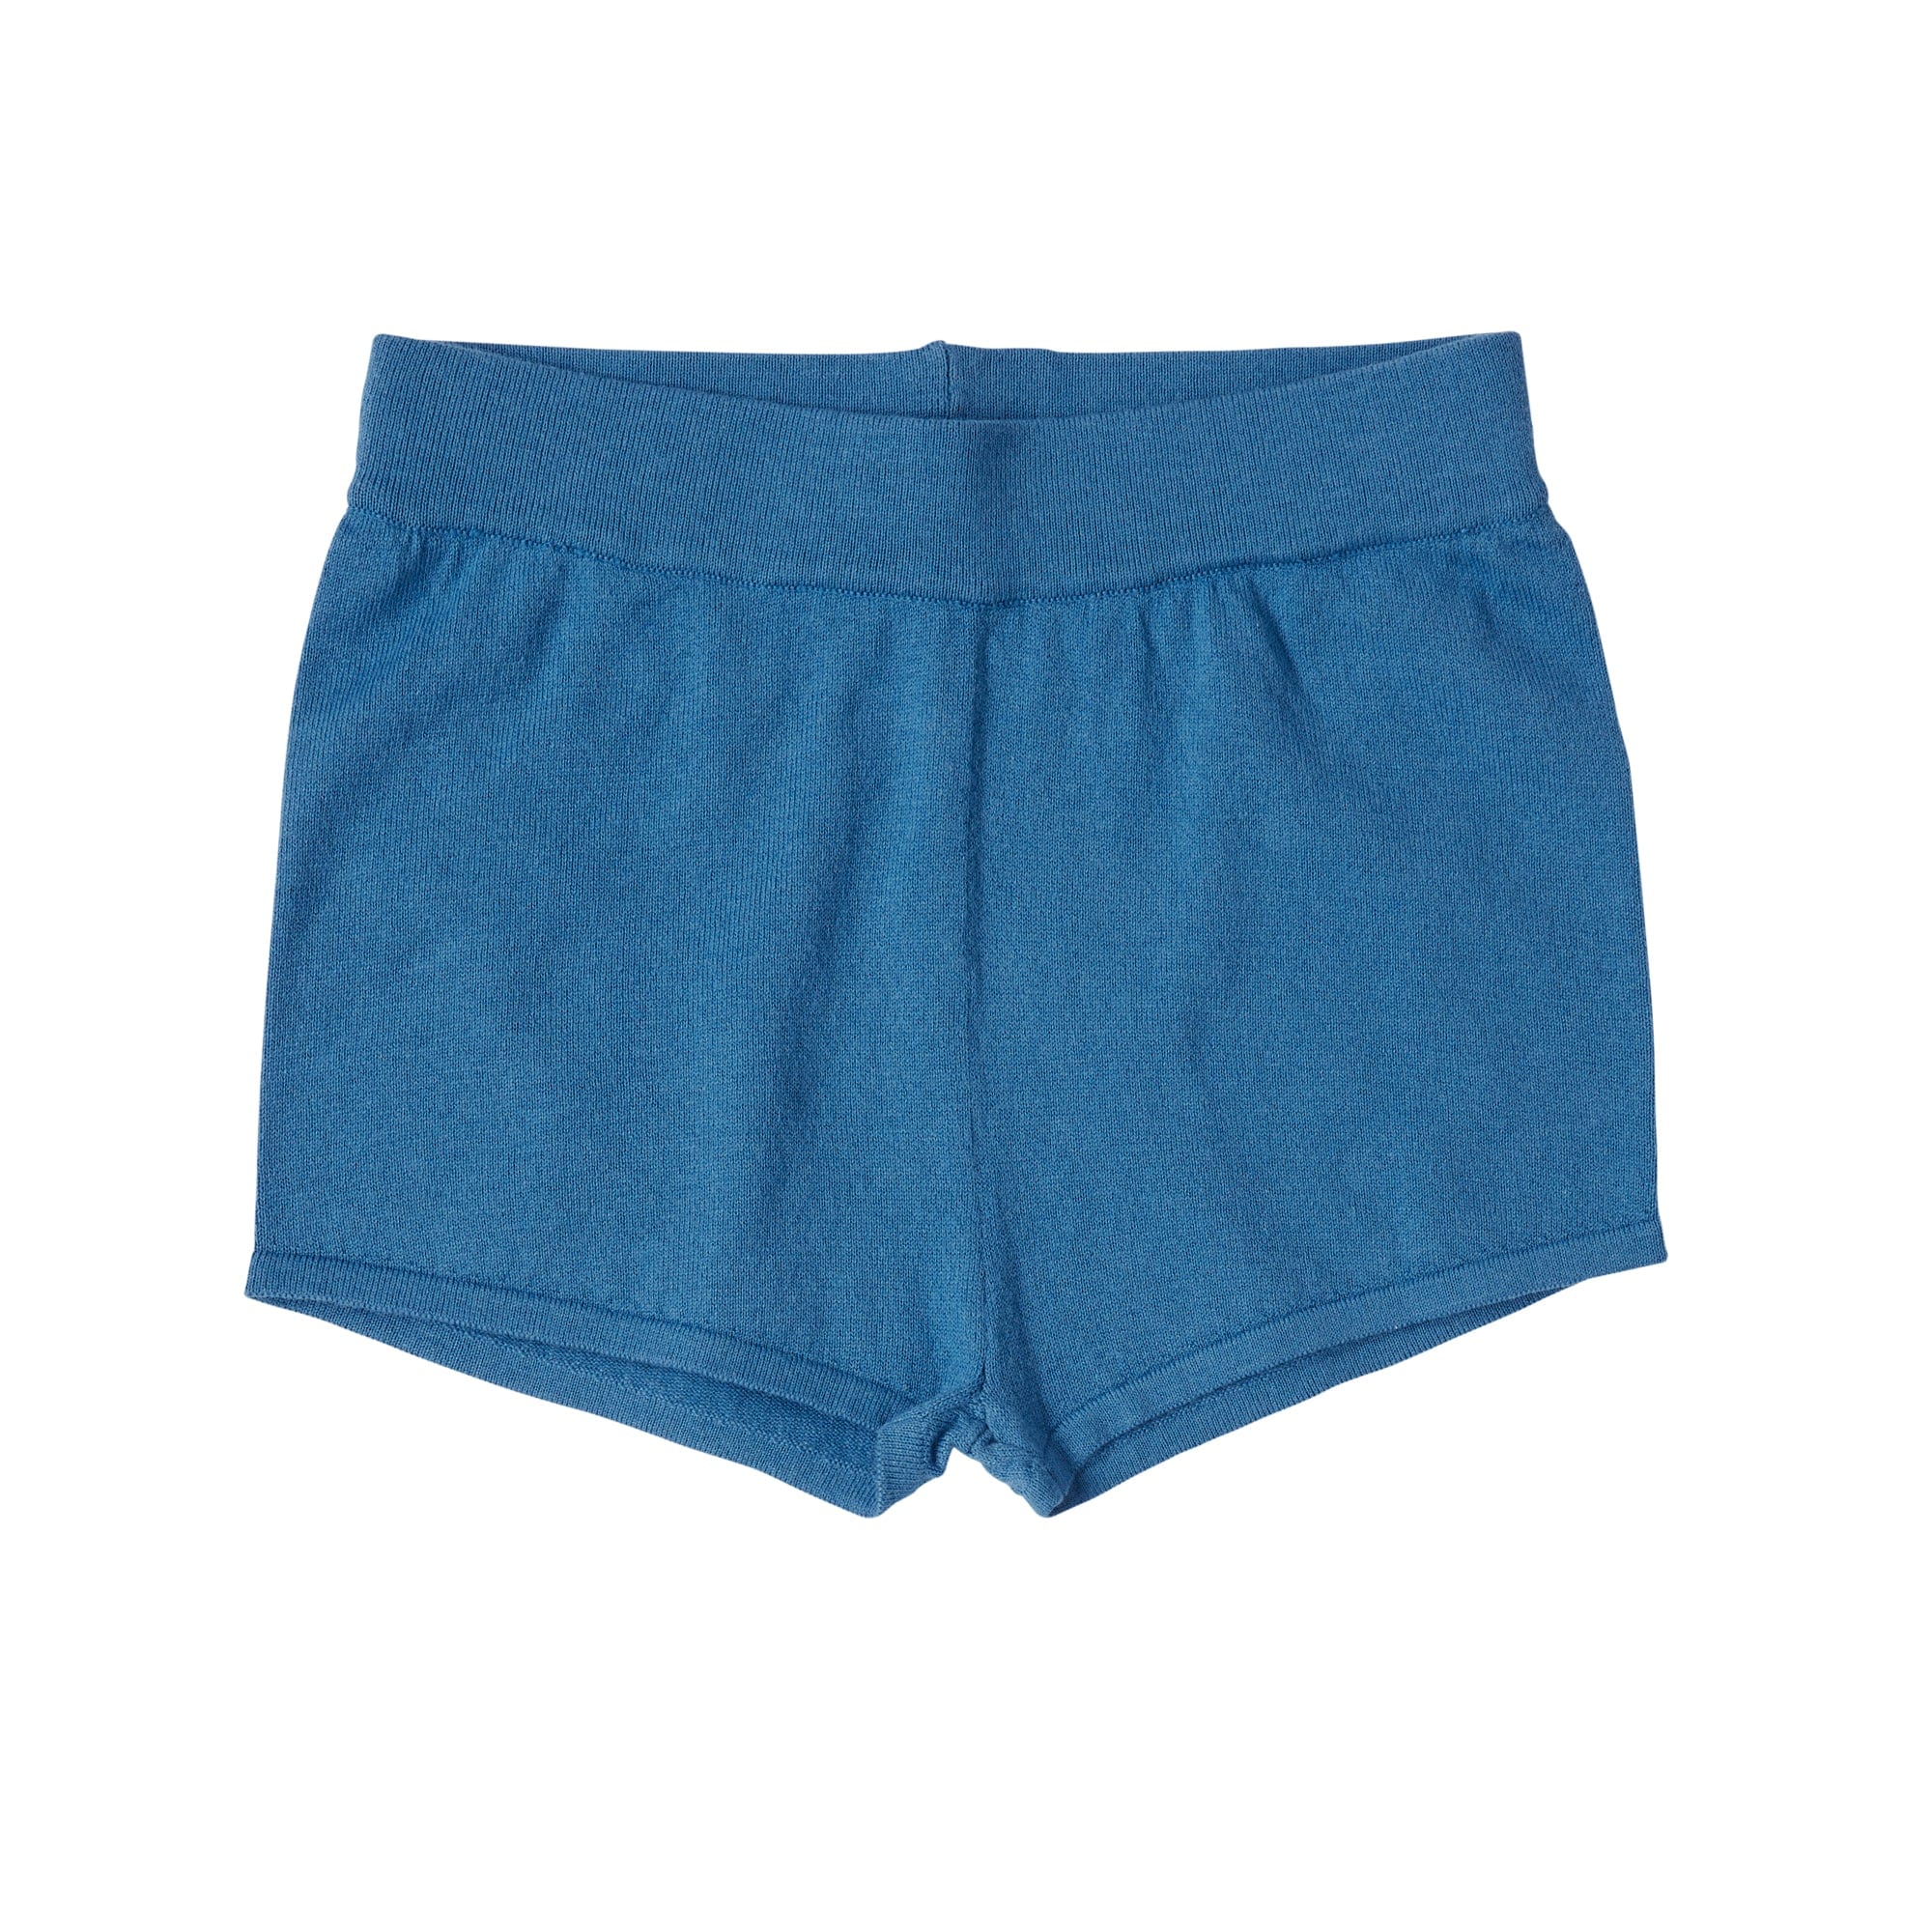 Is it okay to wear short shorts in the beach? - Quora